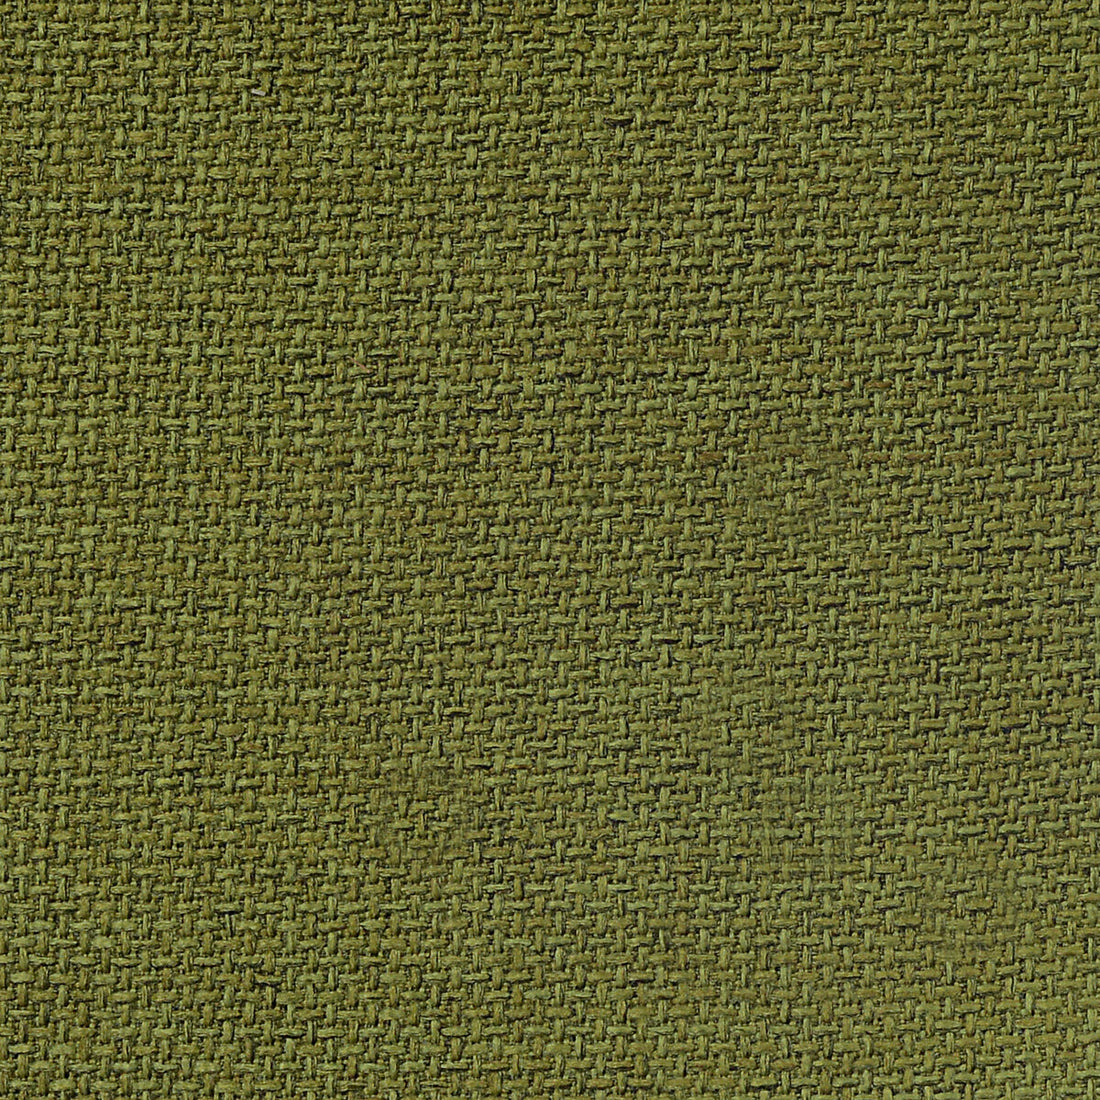 Kravet Contract fabric in 35182-23 color - pattern 35182.23.0 - by Kravet Contract